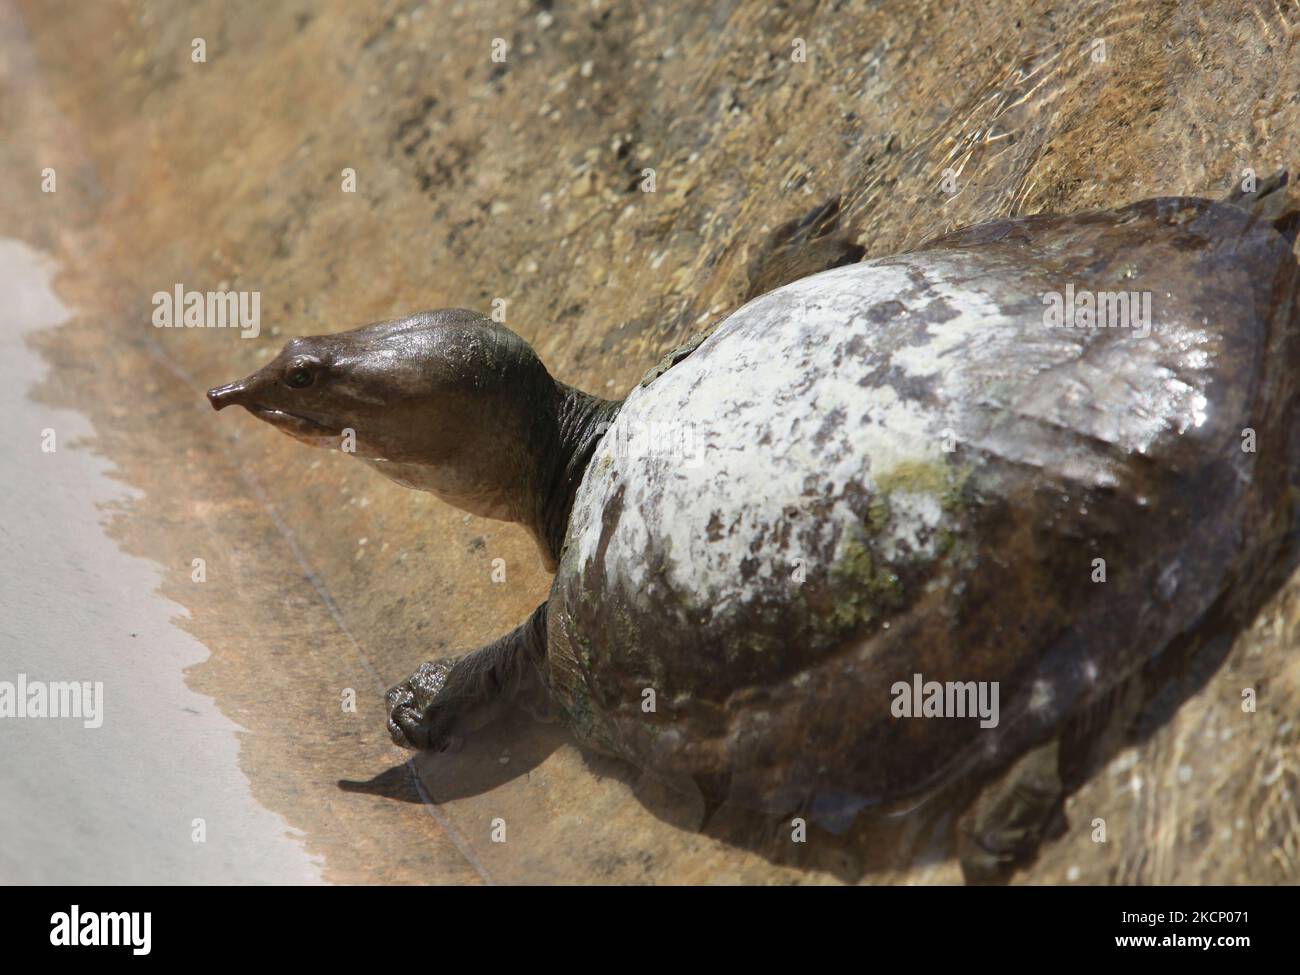 A Florida softshell turtle (Apalone ferox) at a nature reserve near Everglades National Park in Florida, USA. The Florida softshell turtle is a species of softshell turtle native to the southeastern United States, and is one of the fastest turtles to move on land. (Photo by Creative Touch Imaging Ltd./NurPhoto) Stock Photo